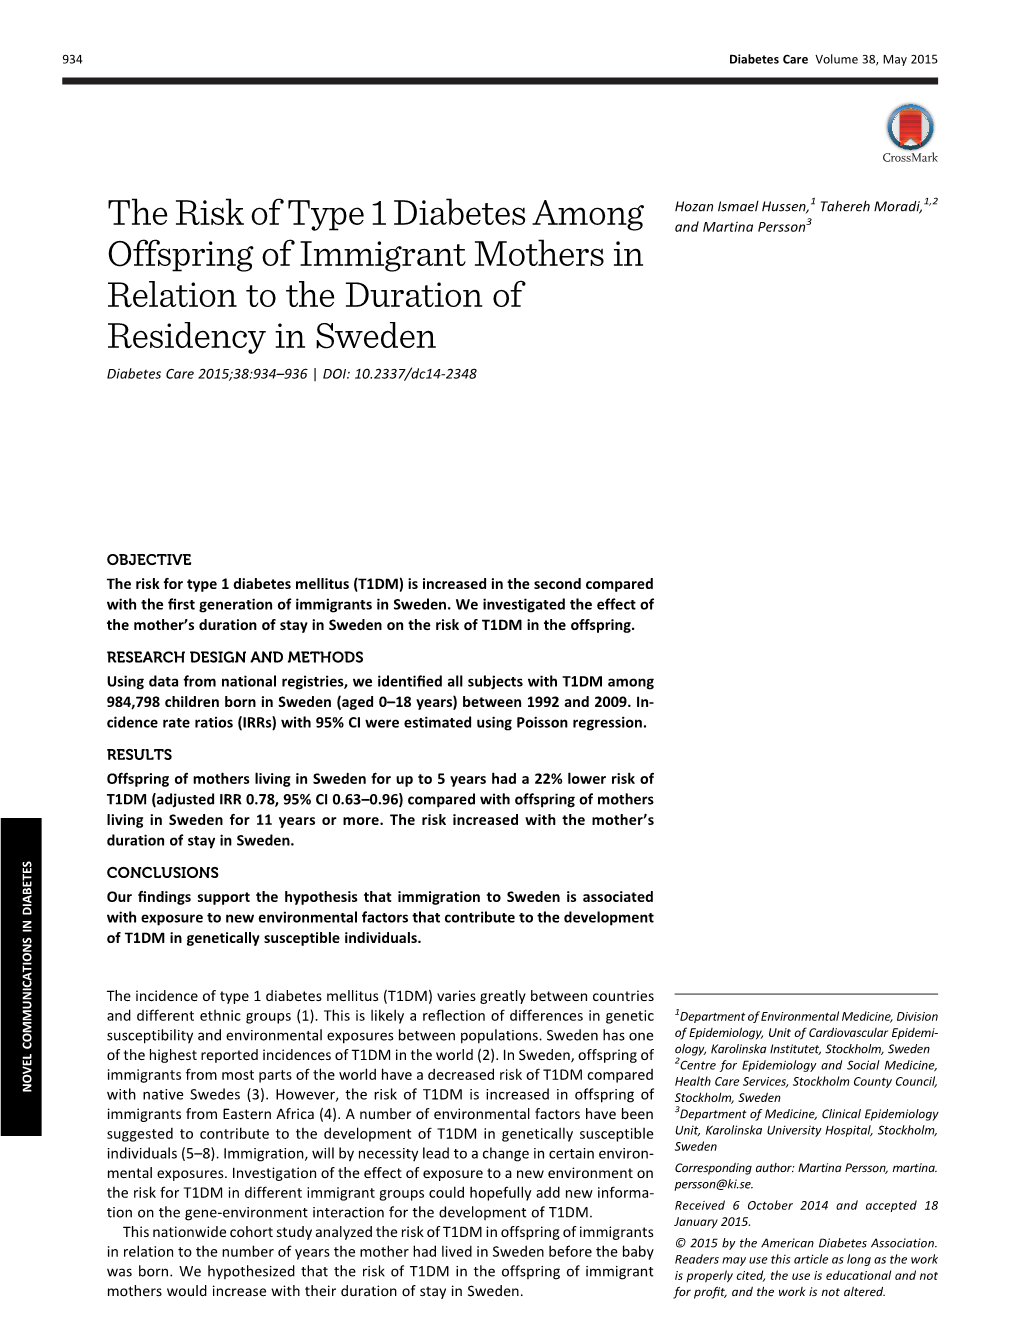 The Risk of Type 1 Diabetes Among Offspring of Immigrant Mothers In